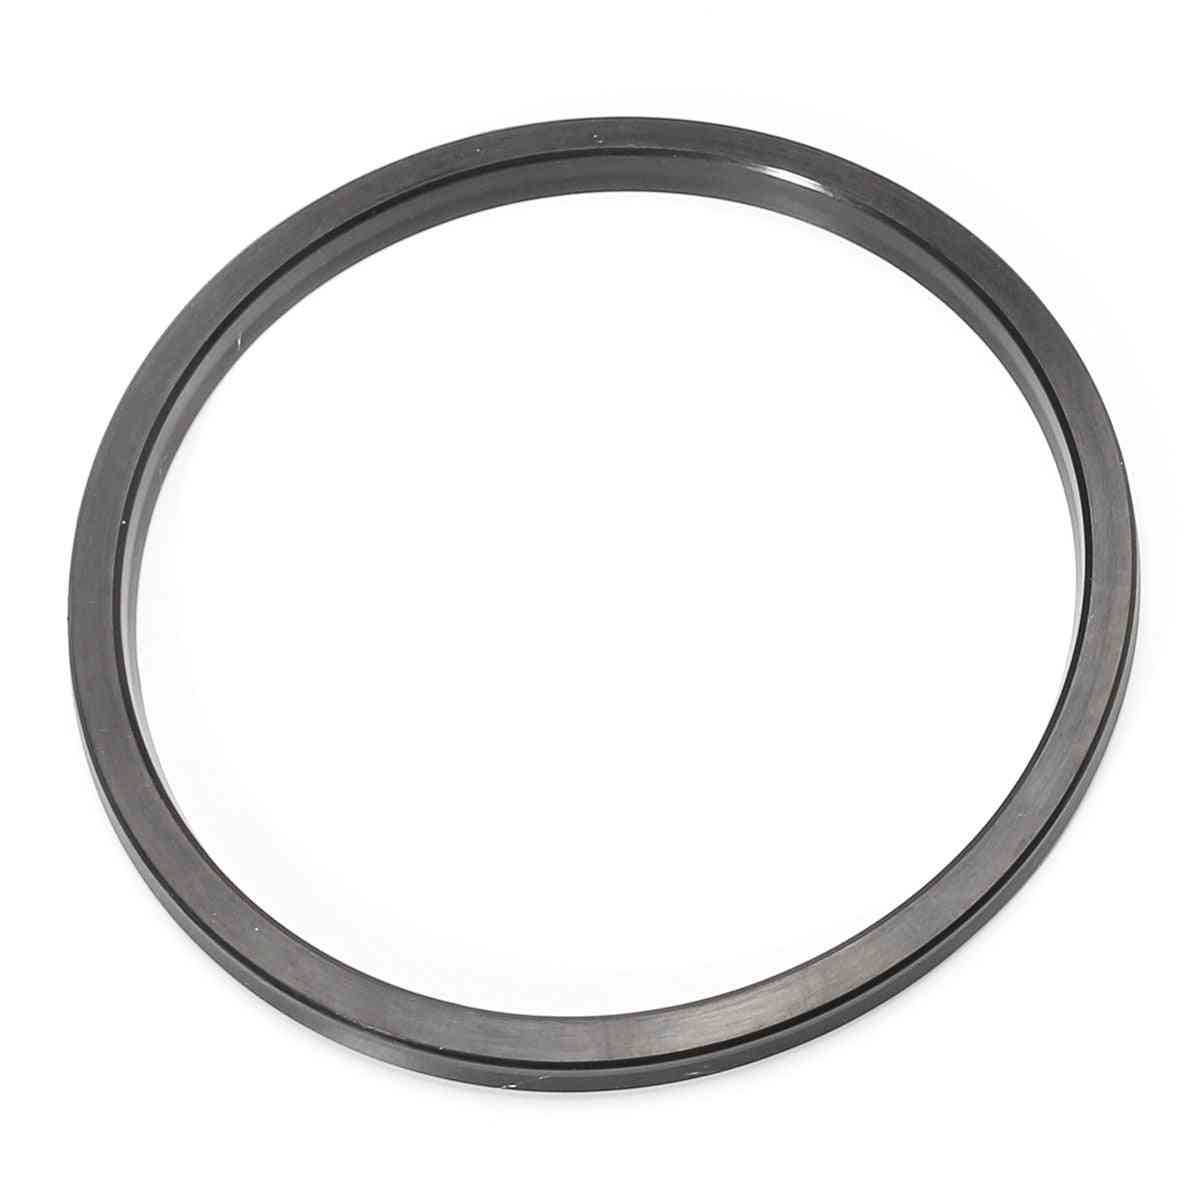 Main Piston And Shaft Seals With End Cap O Ring For Ranger Tire Changers